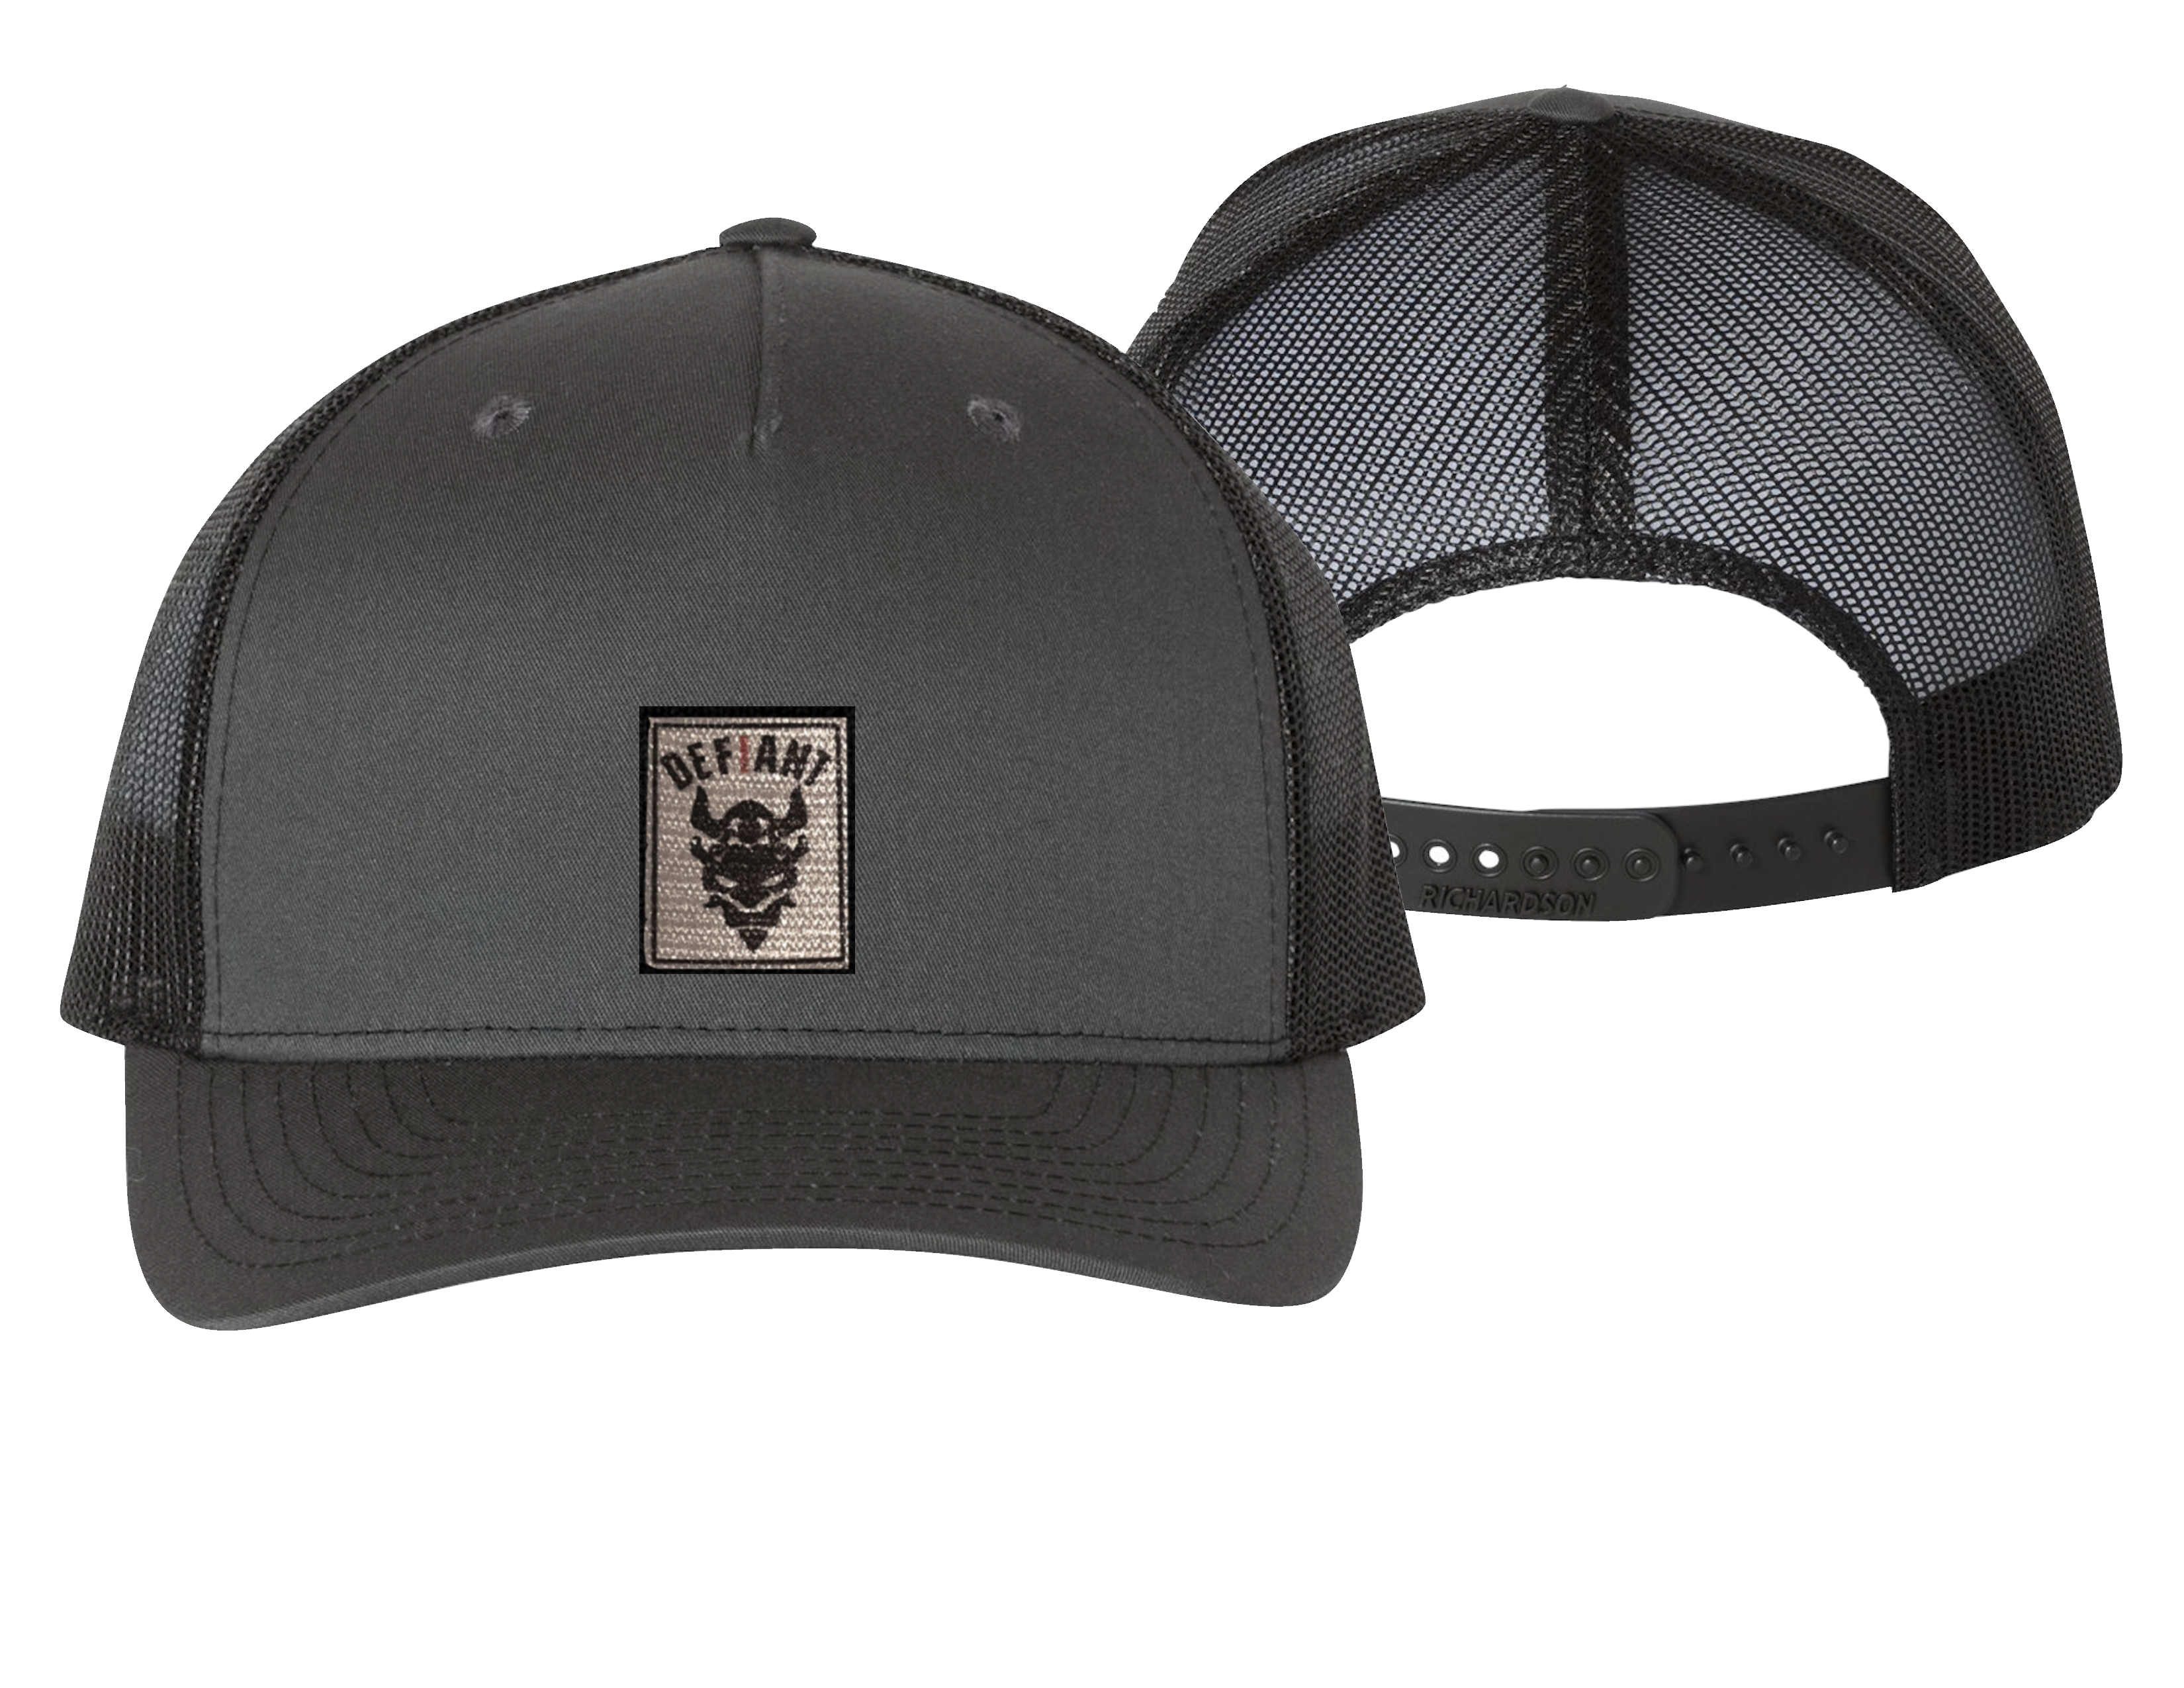 CONQUER - CHARCOAL AND BLACK - MESH 5 PANEL SNAP BACK HAT WITH TWILL EMBLEM